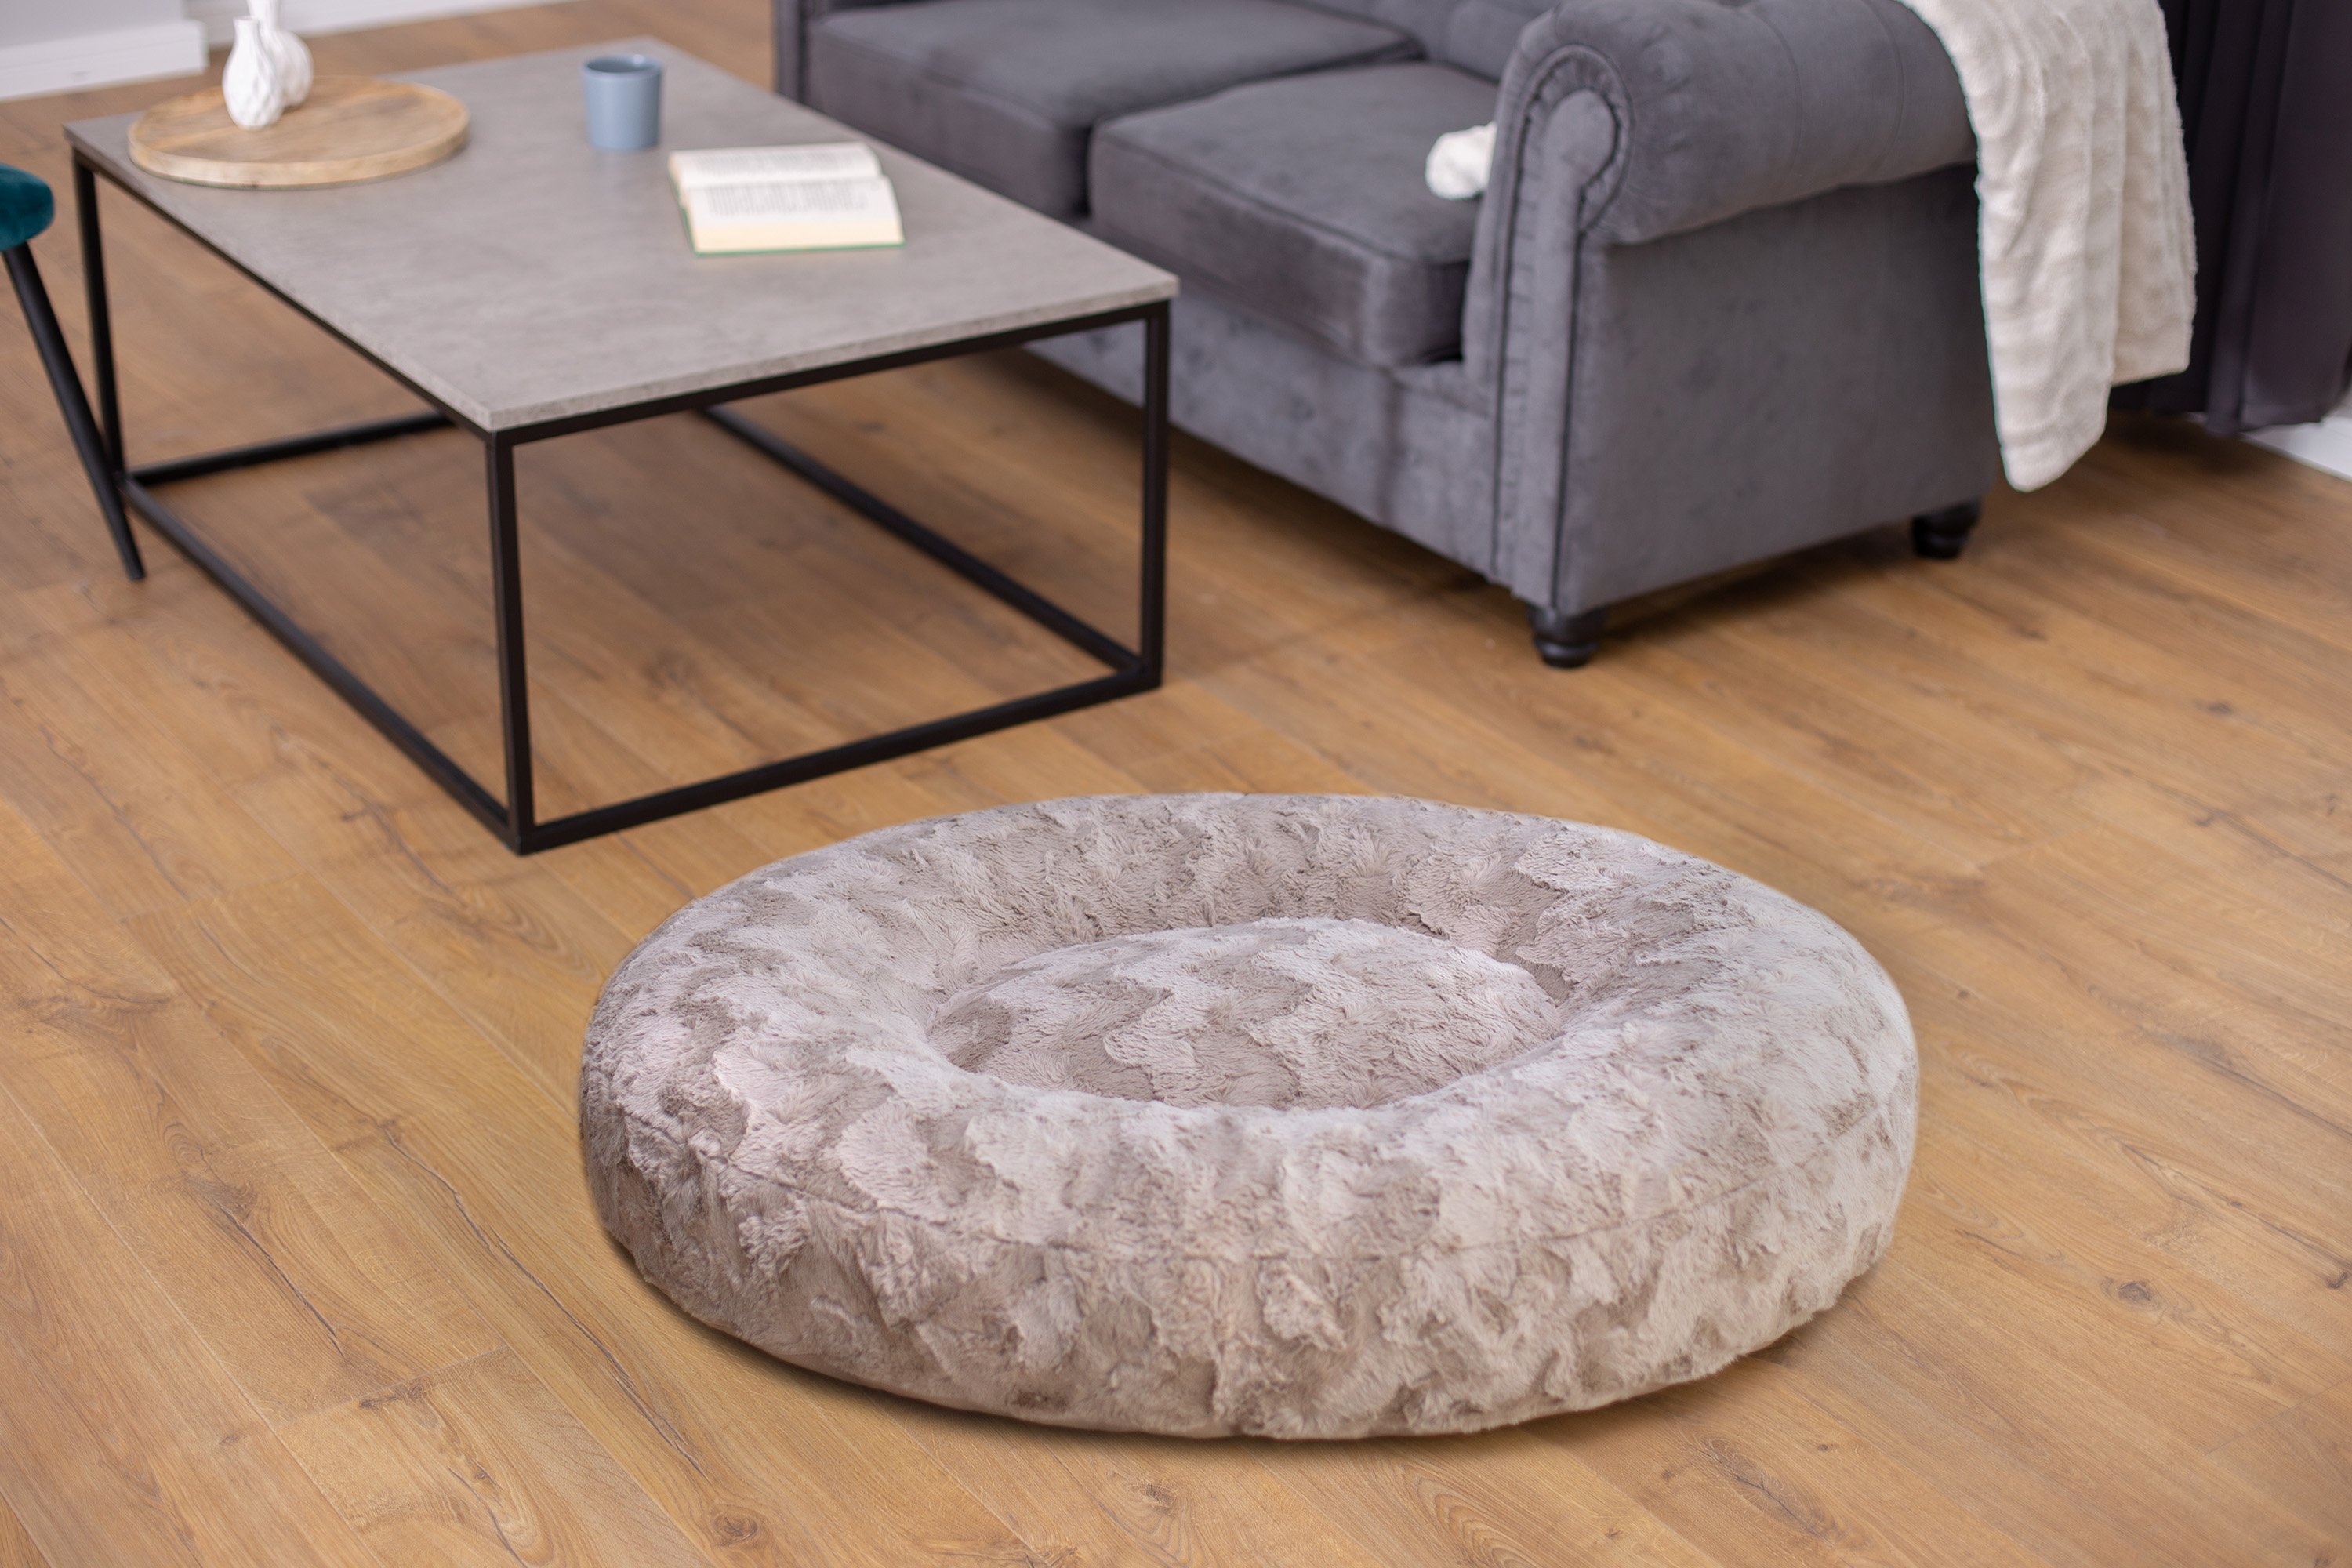 Wau-Bed Wild Wave Taupe Oval L (120x100cm)